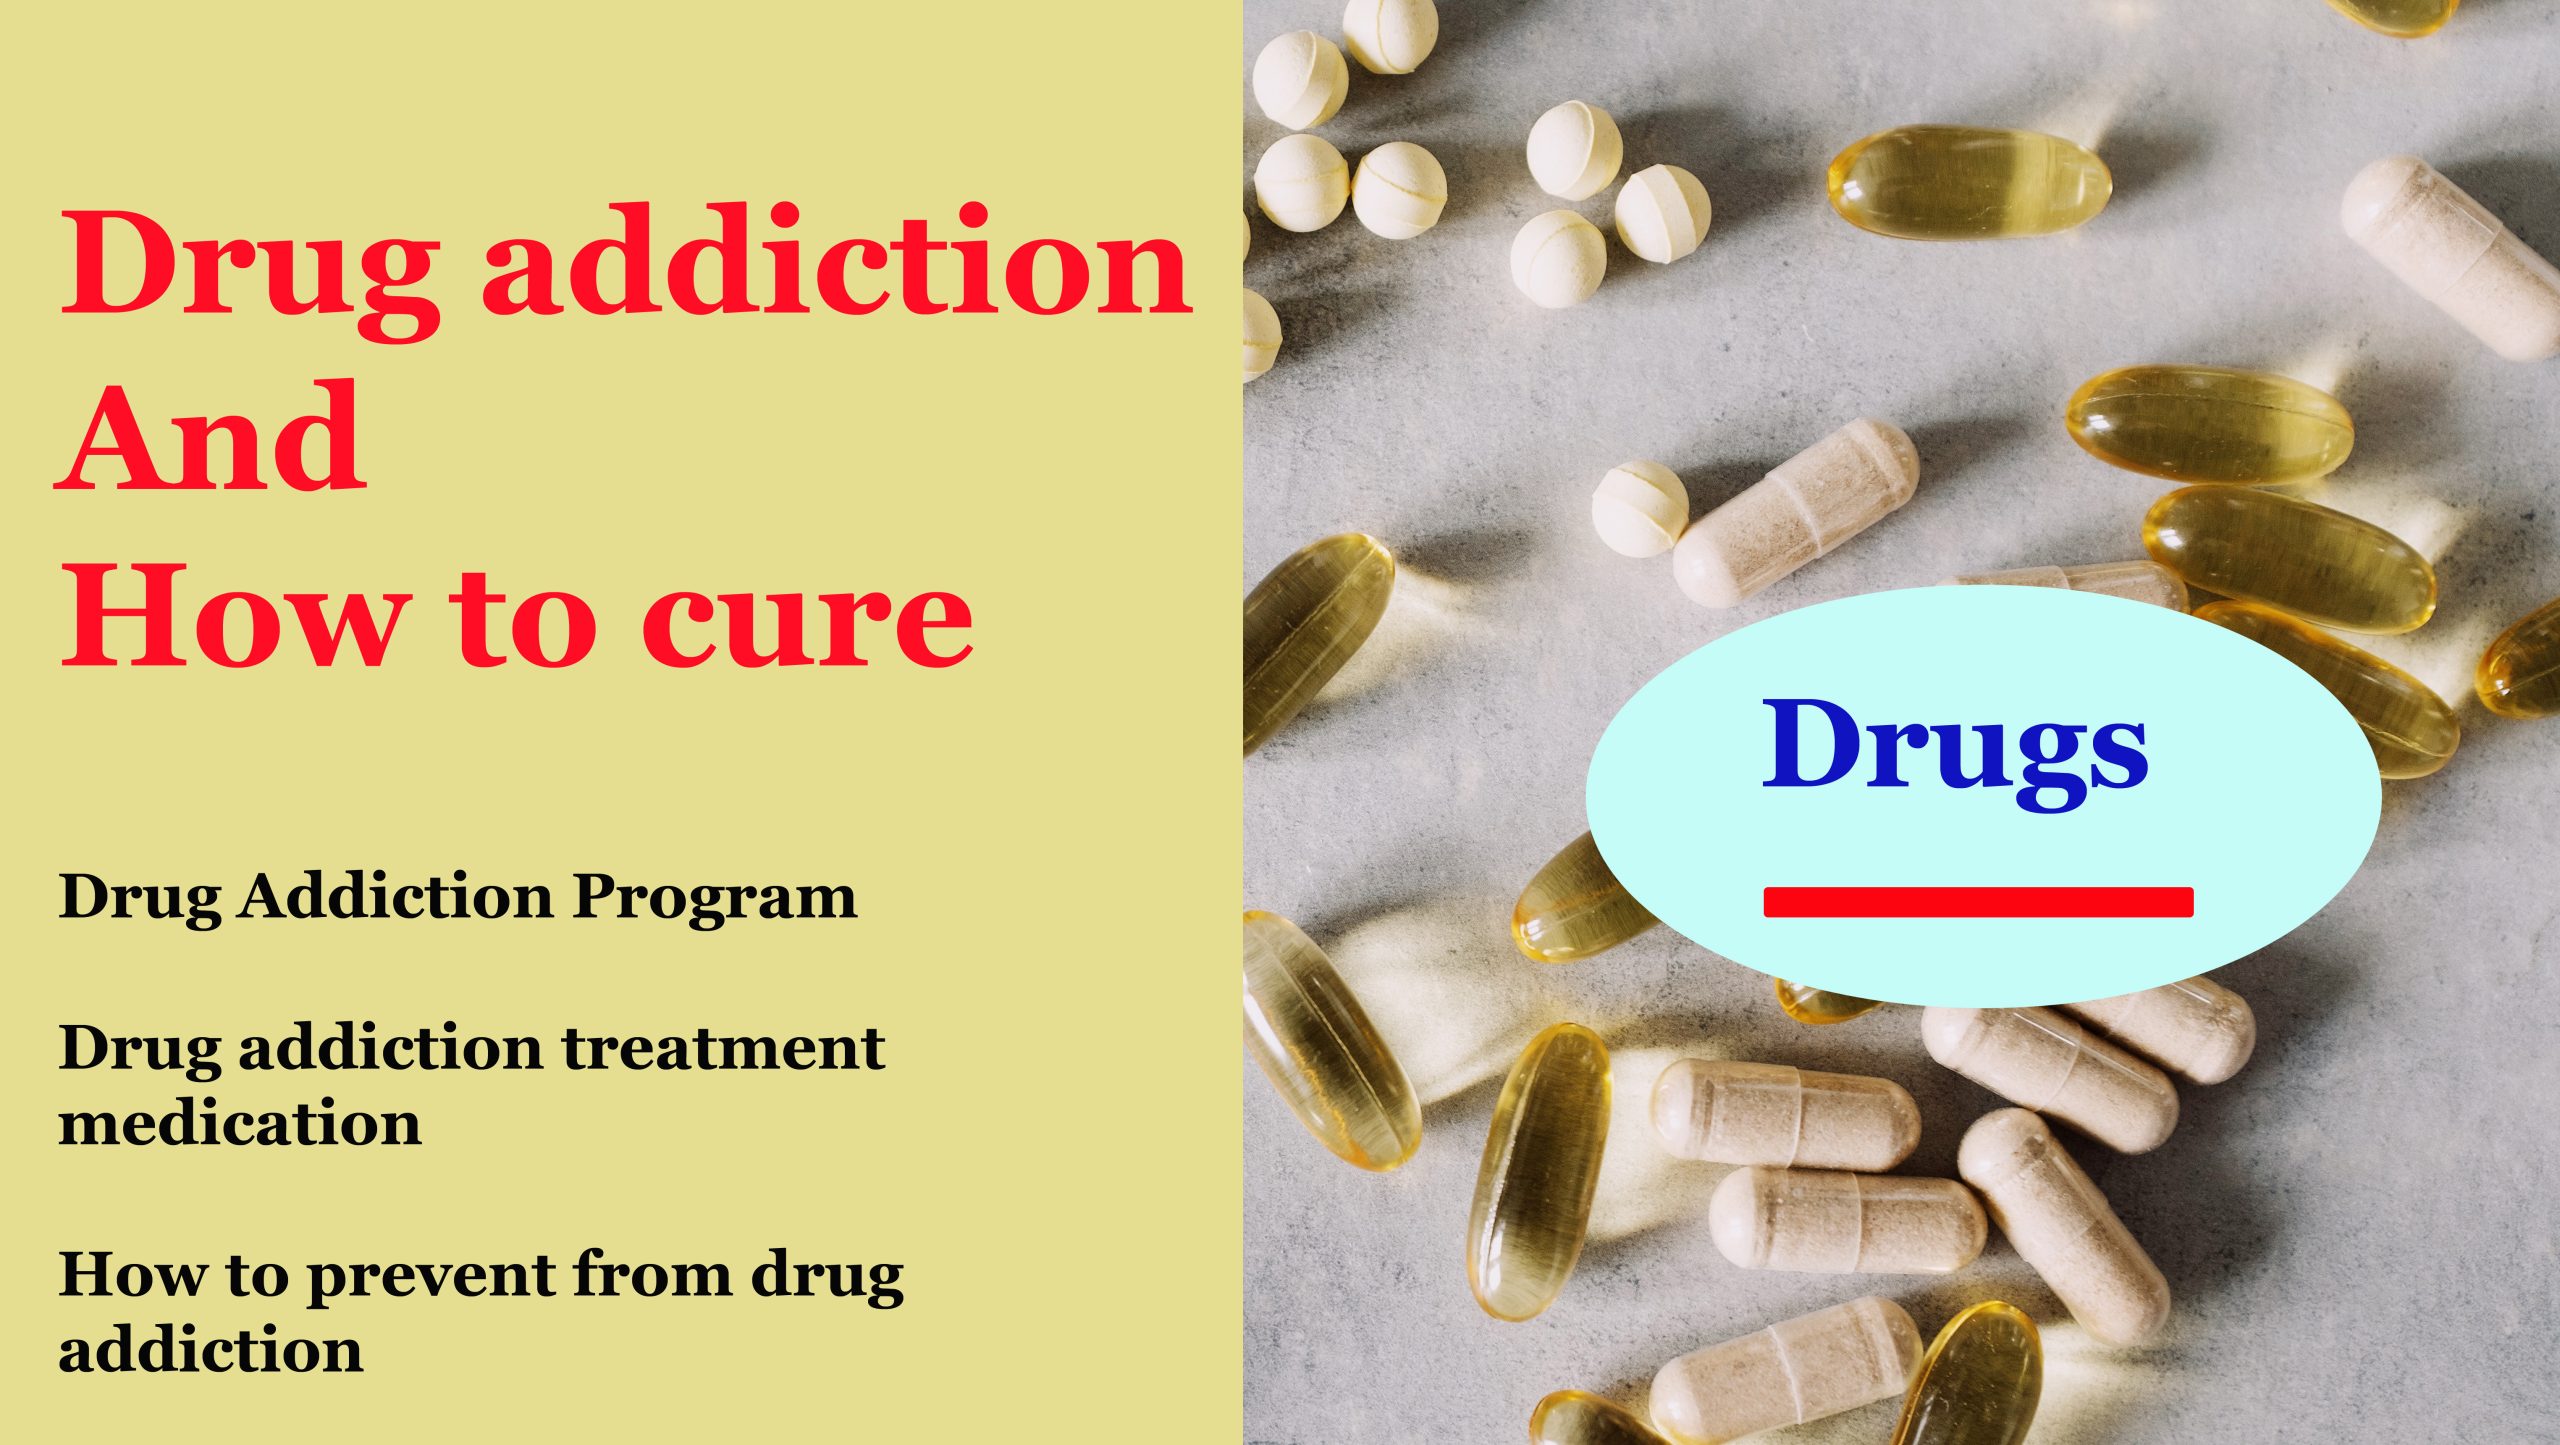 Drug addiction and how to cure